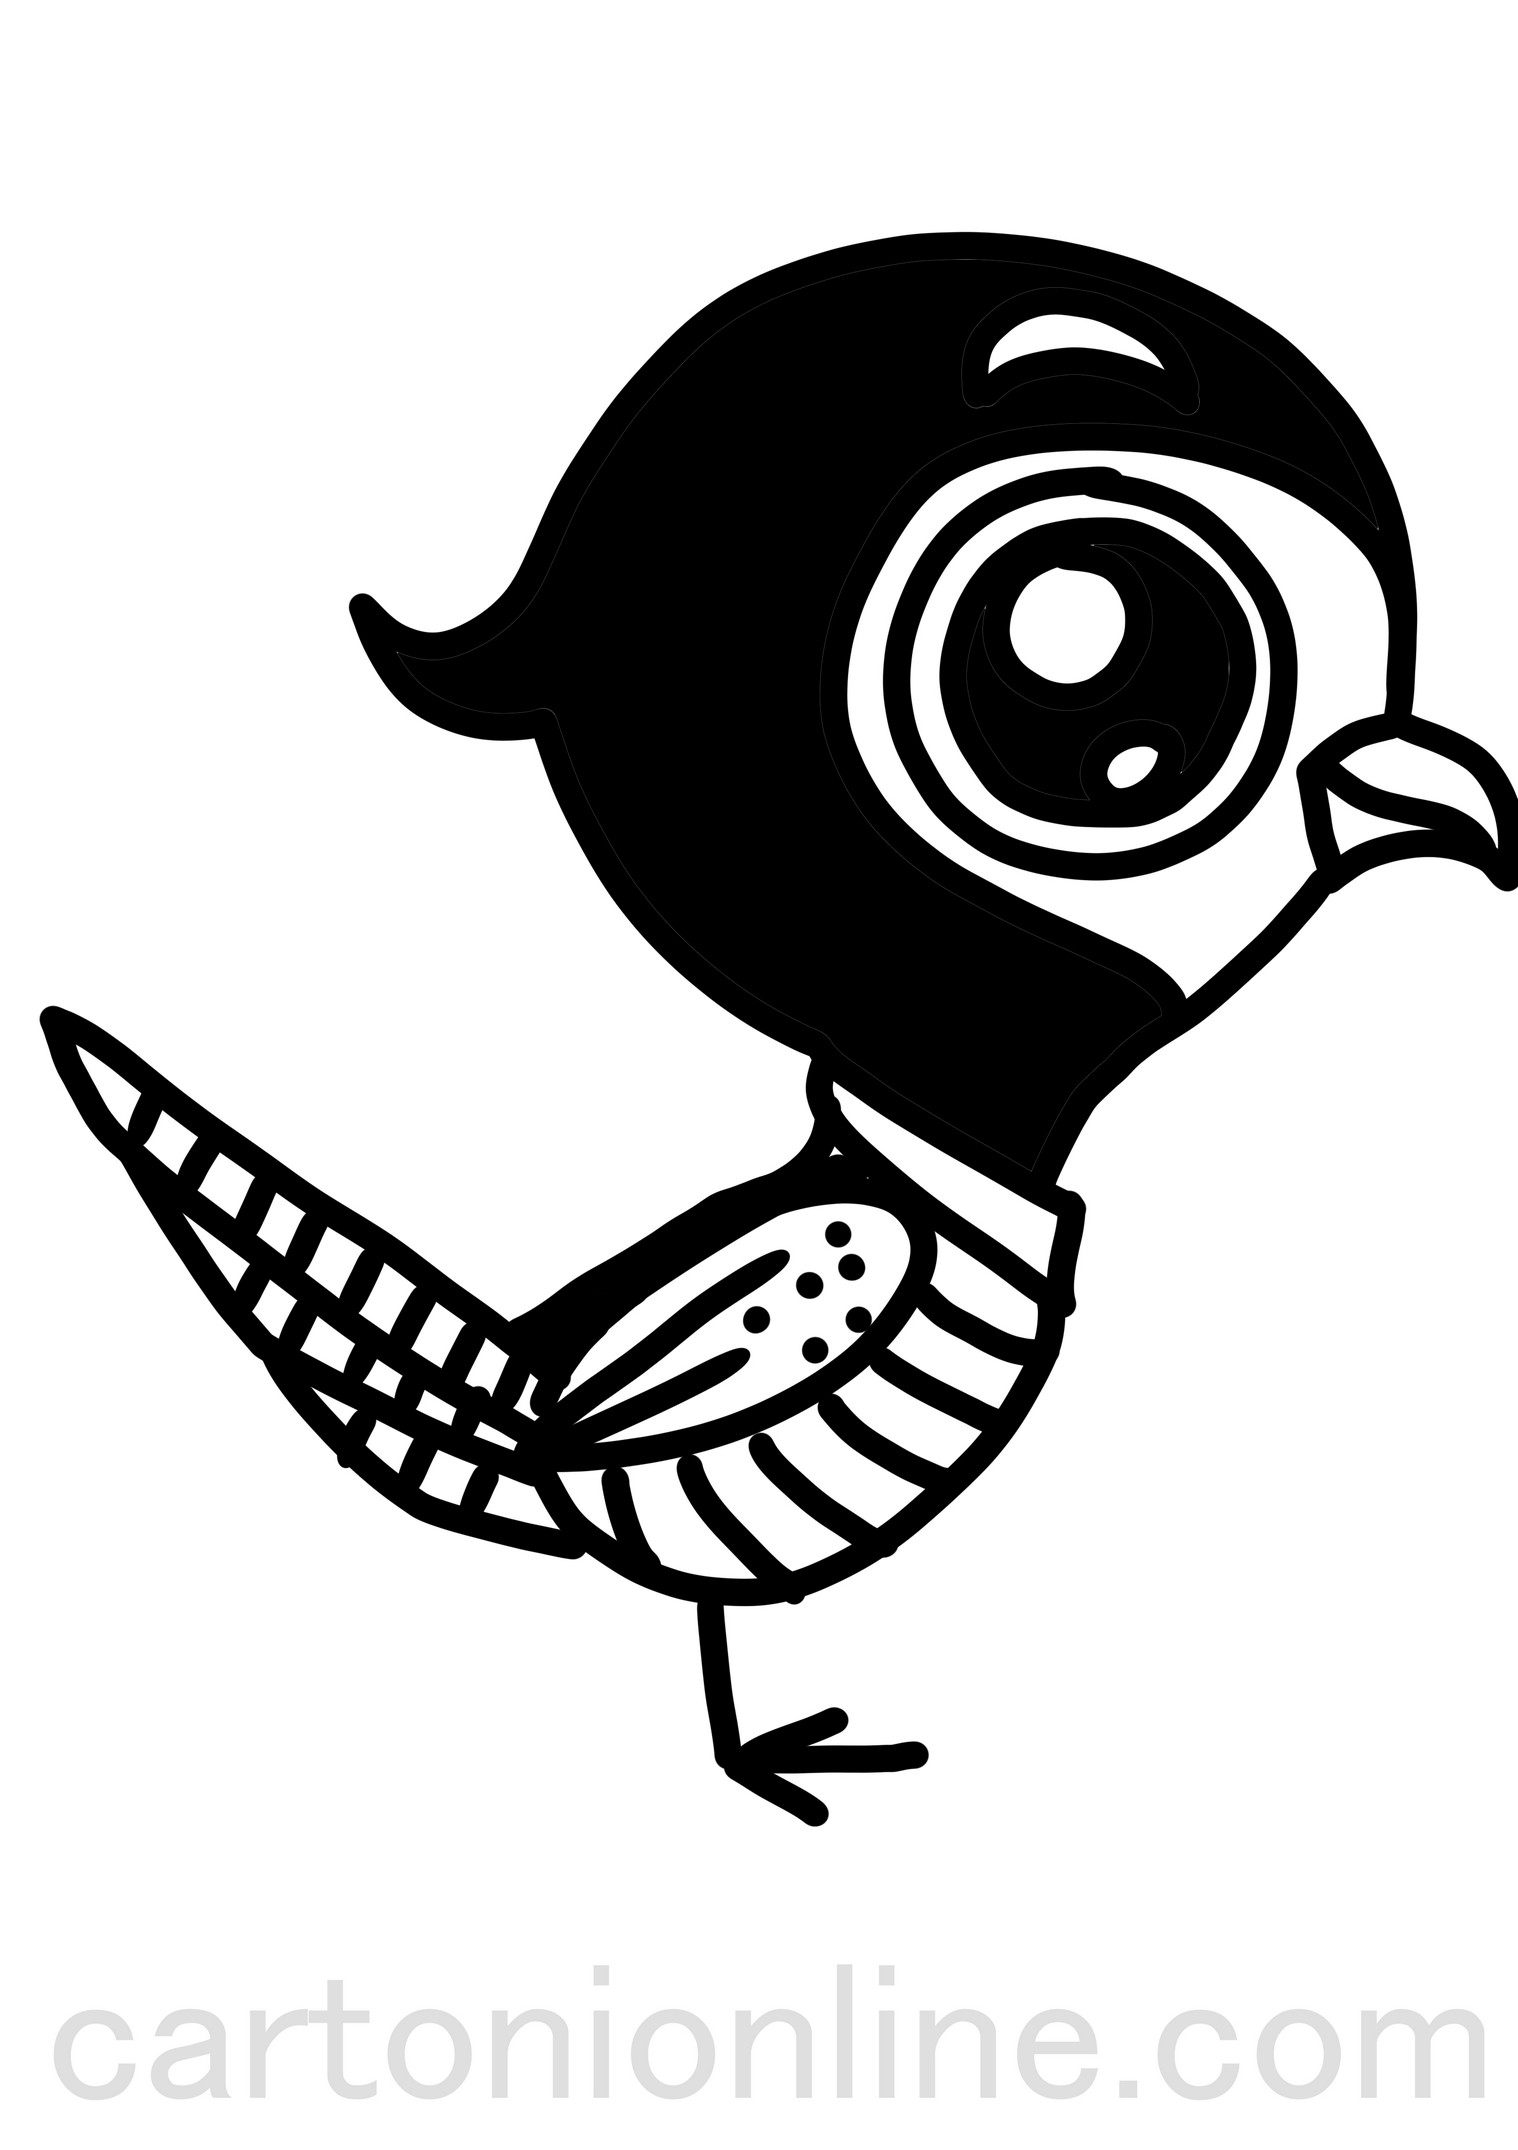 Realistic Pheasant coloring page